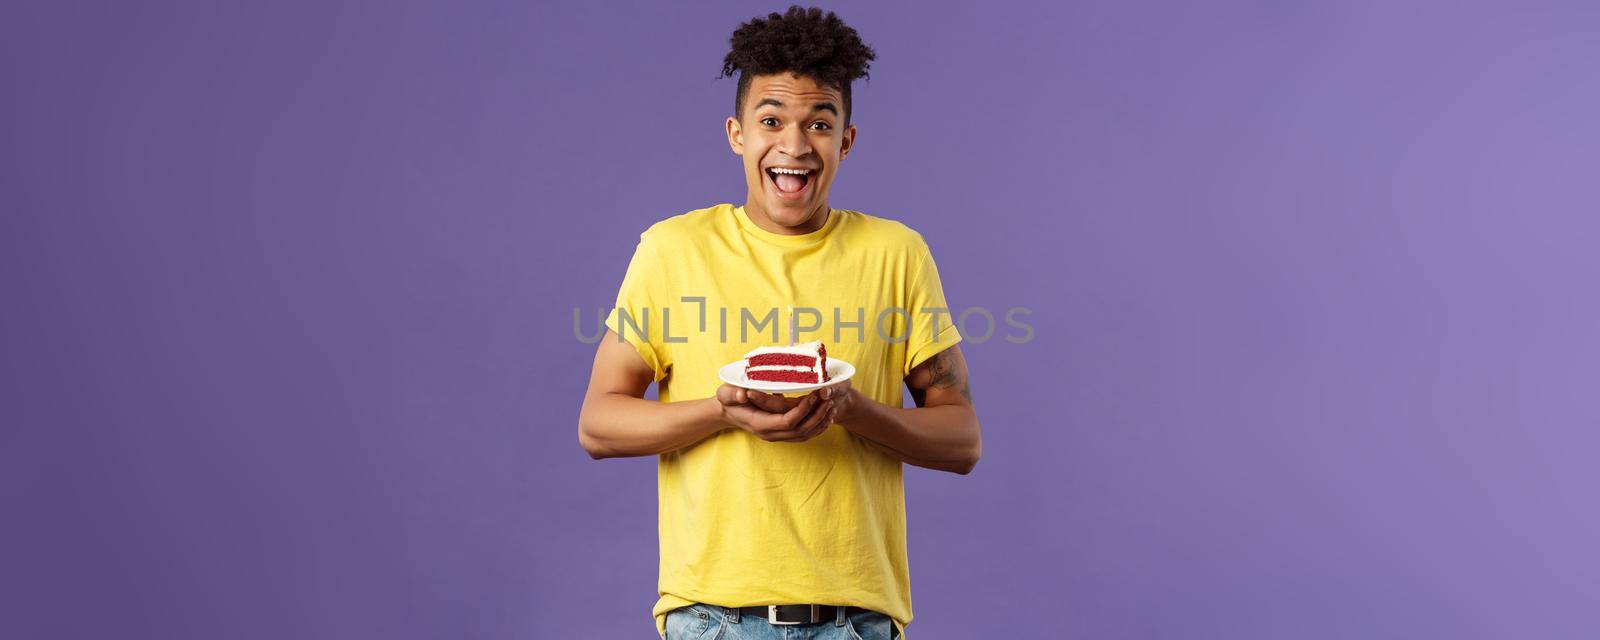 Happy birthday to me. Portrait of upbeat, excited hispanic man with dreads celebrating b-day, holding plate cake with lit candle, smiling amused, making wish, purple background.